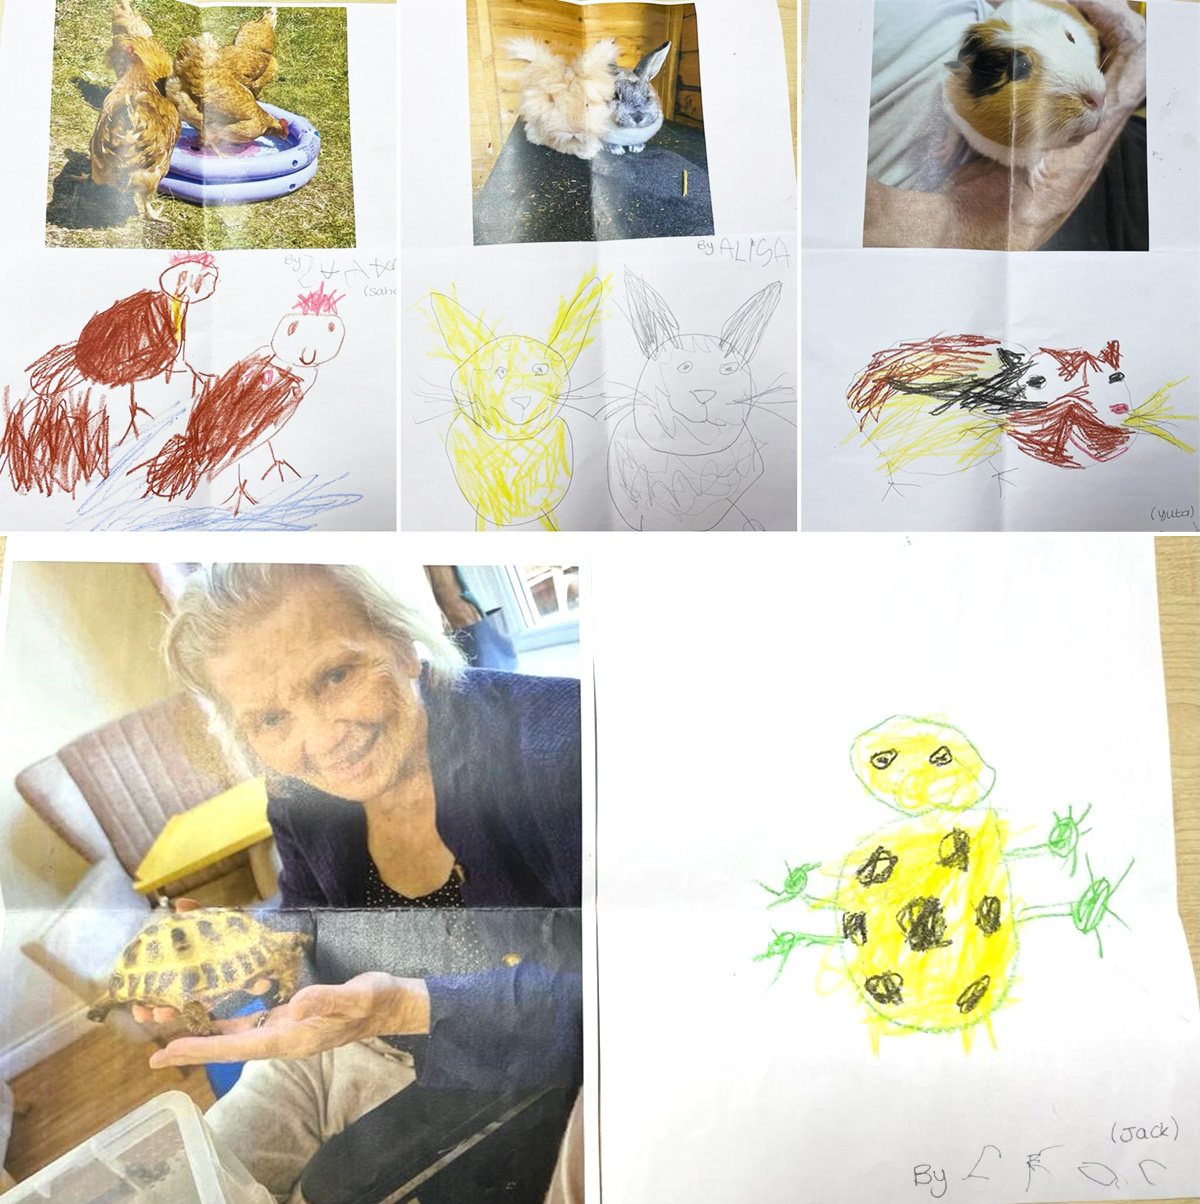 Wonderful pet drawings from a local preschool sent to Princess Christian Care Home